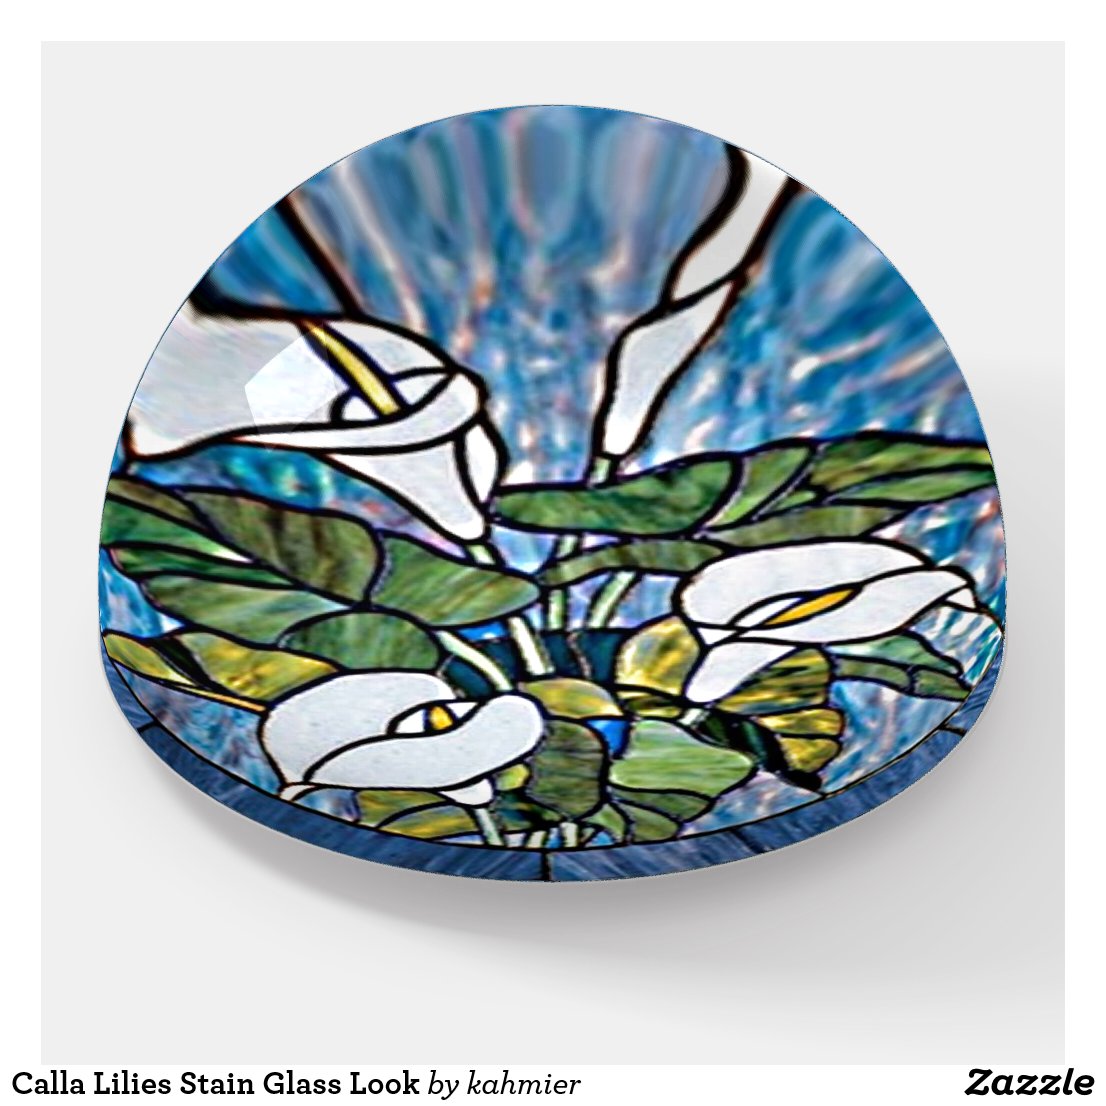 Calla Lilies Stain Glass Look Paperweight